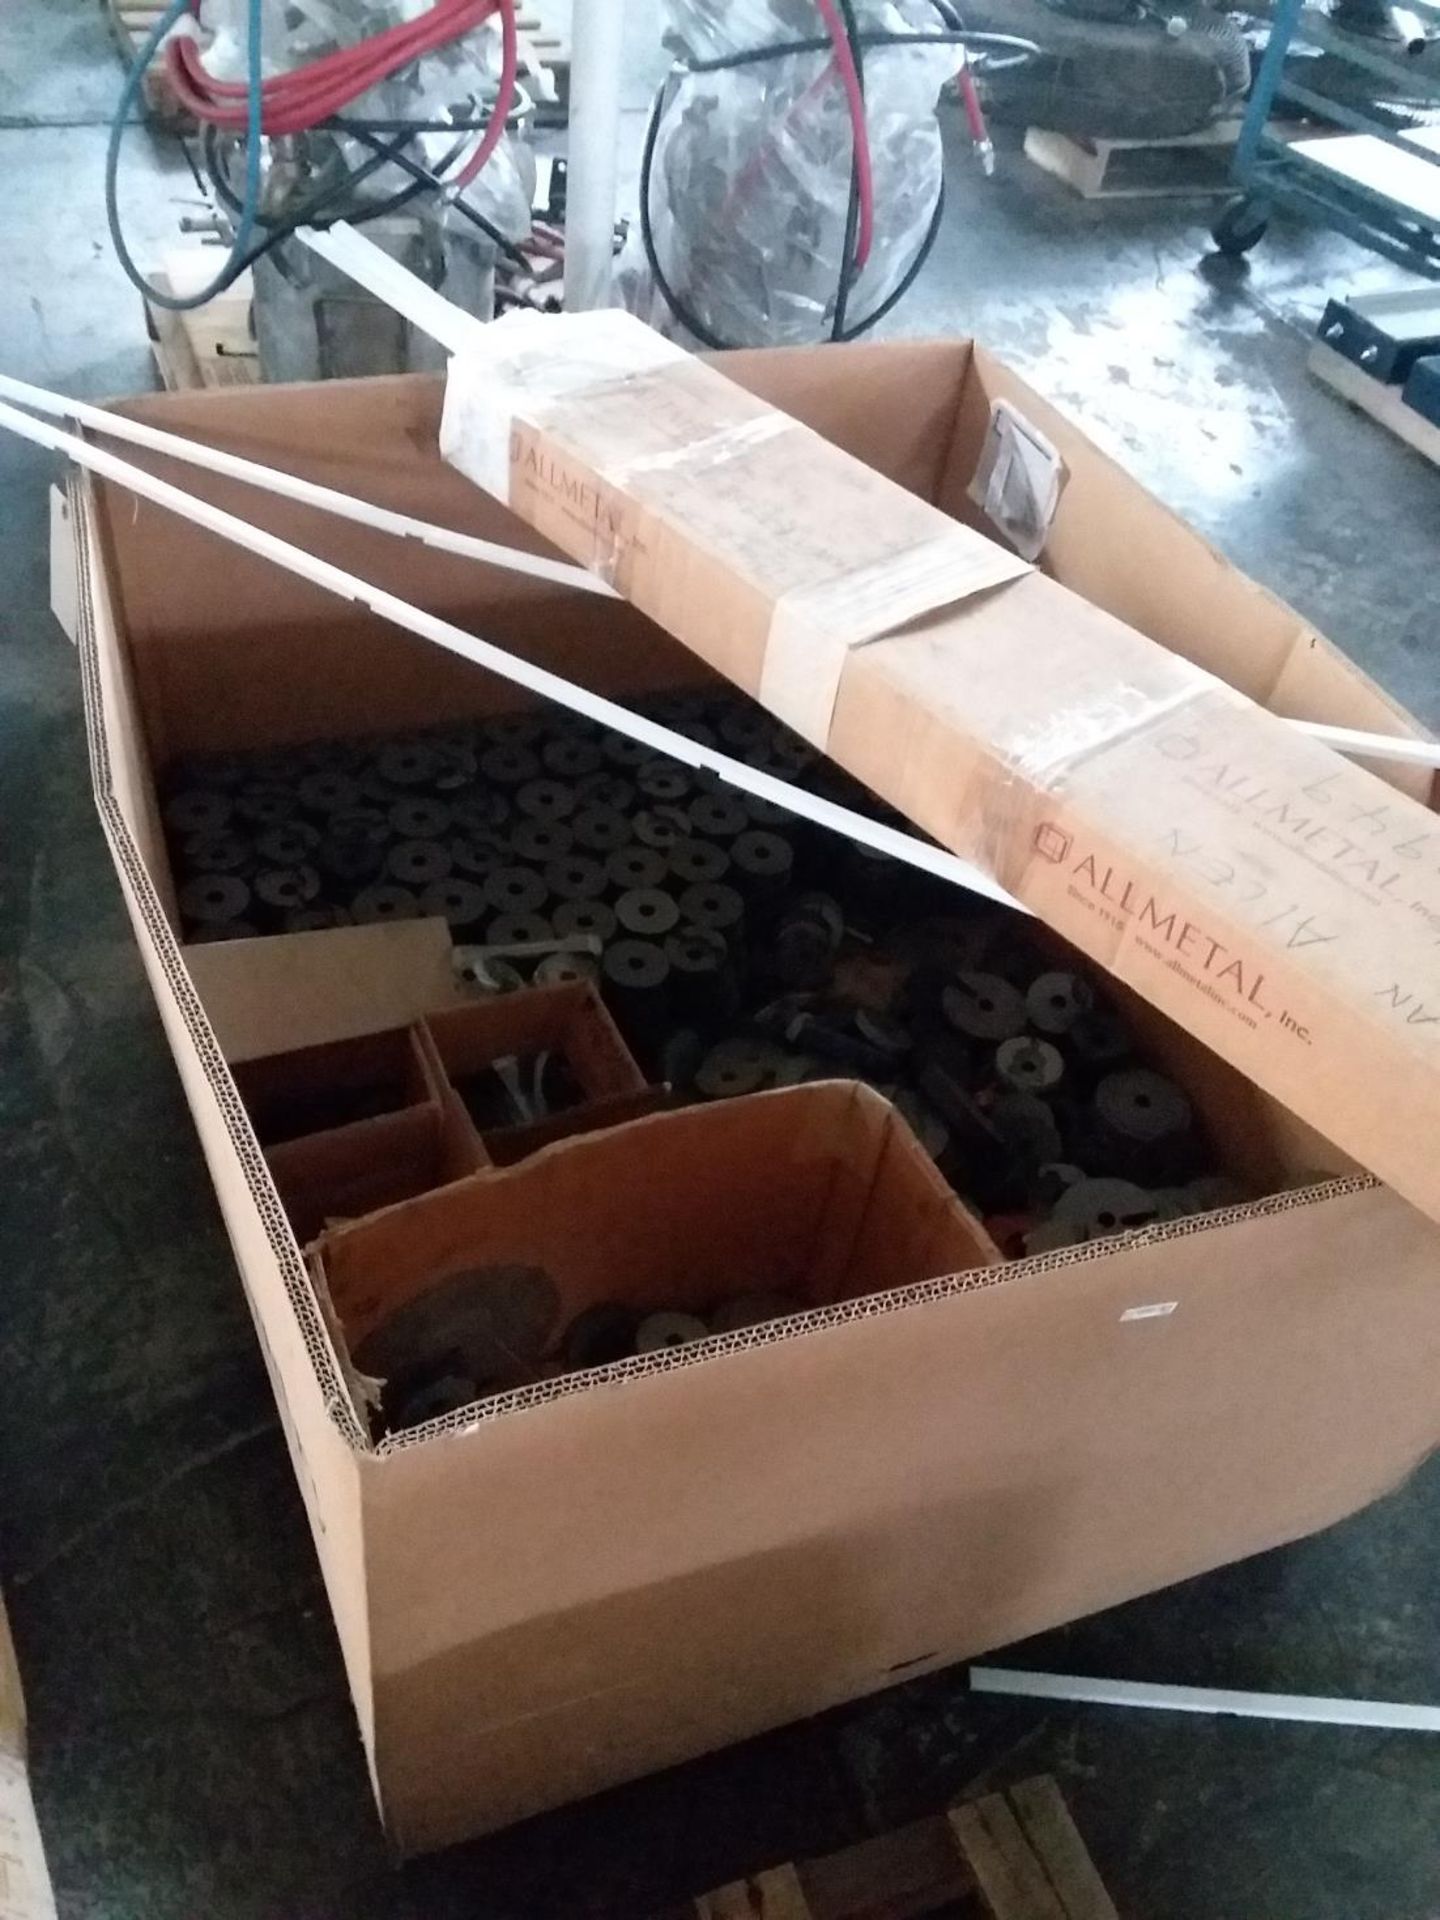 Boxes of metal loaders for the bottoms of lamps - Image 2 of 2